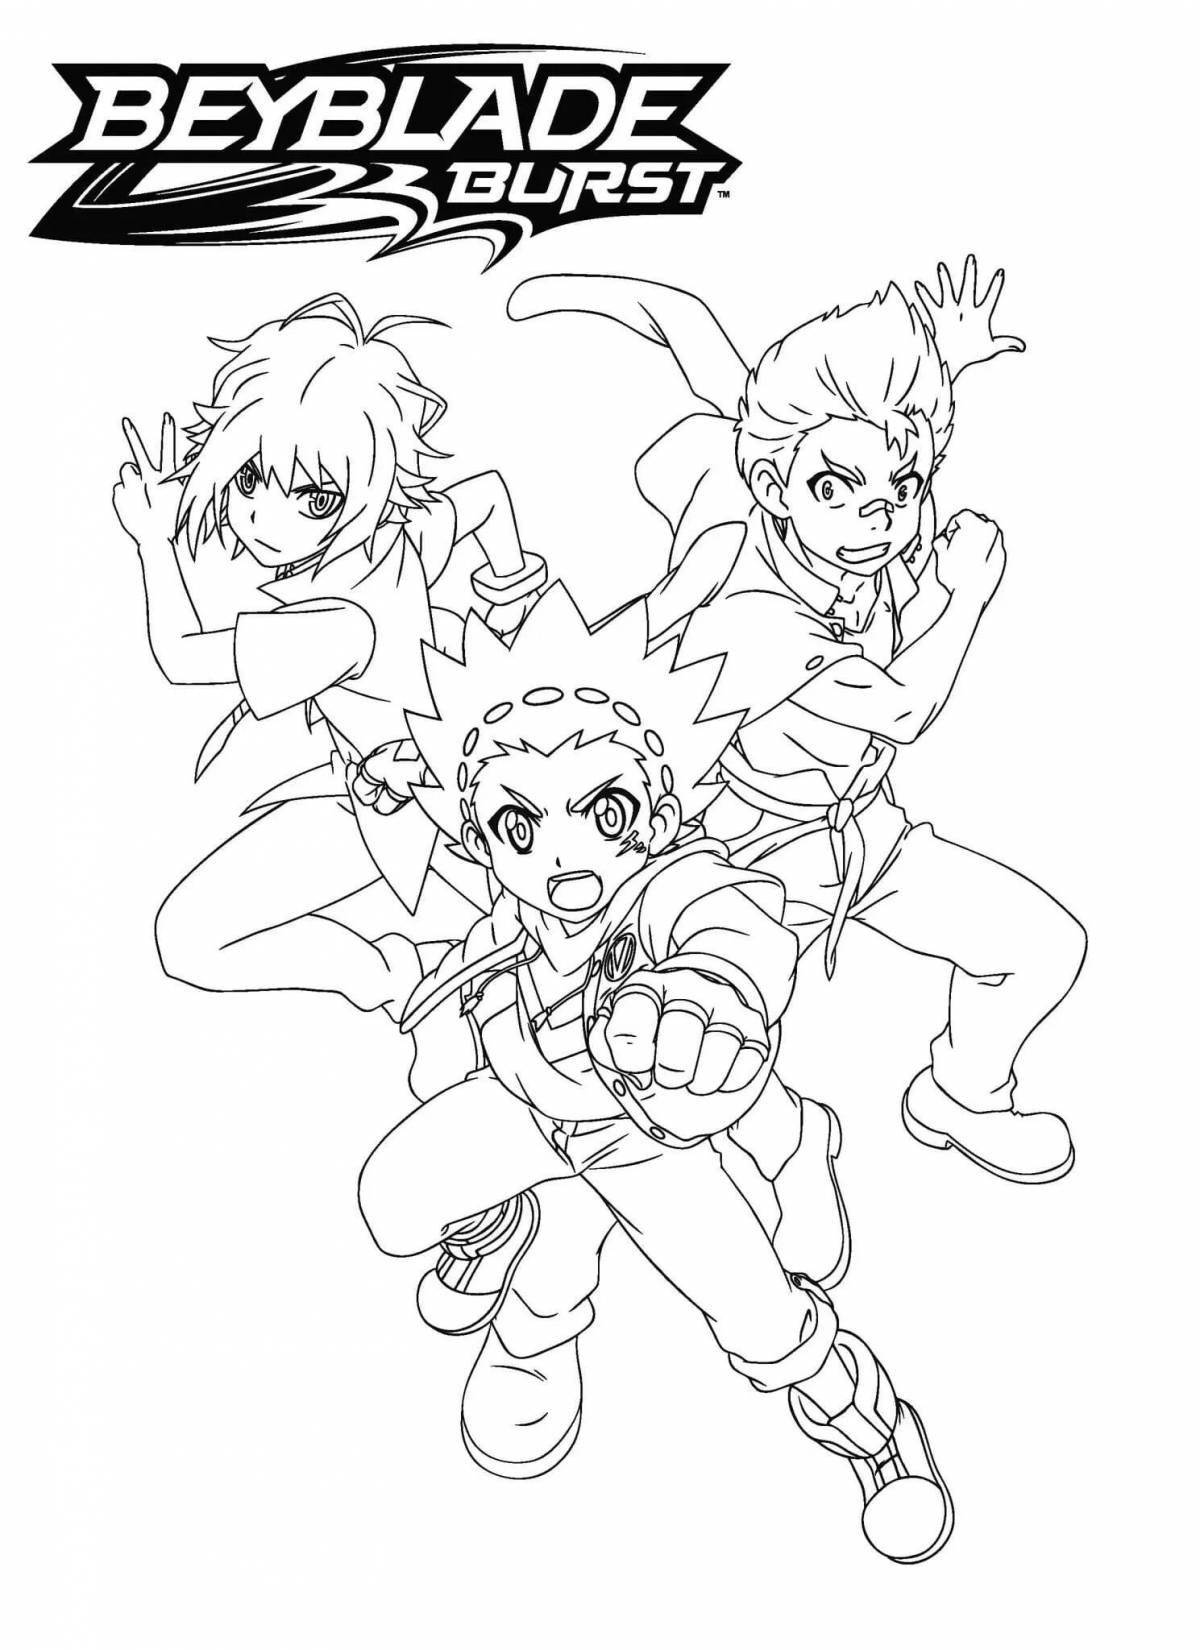 Dazzling beyblade burst coloring page